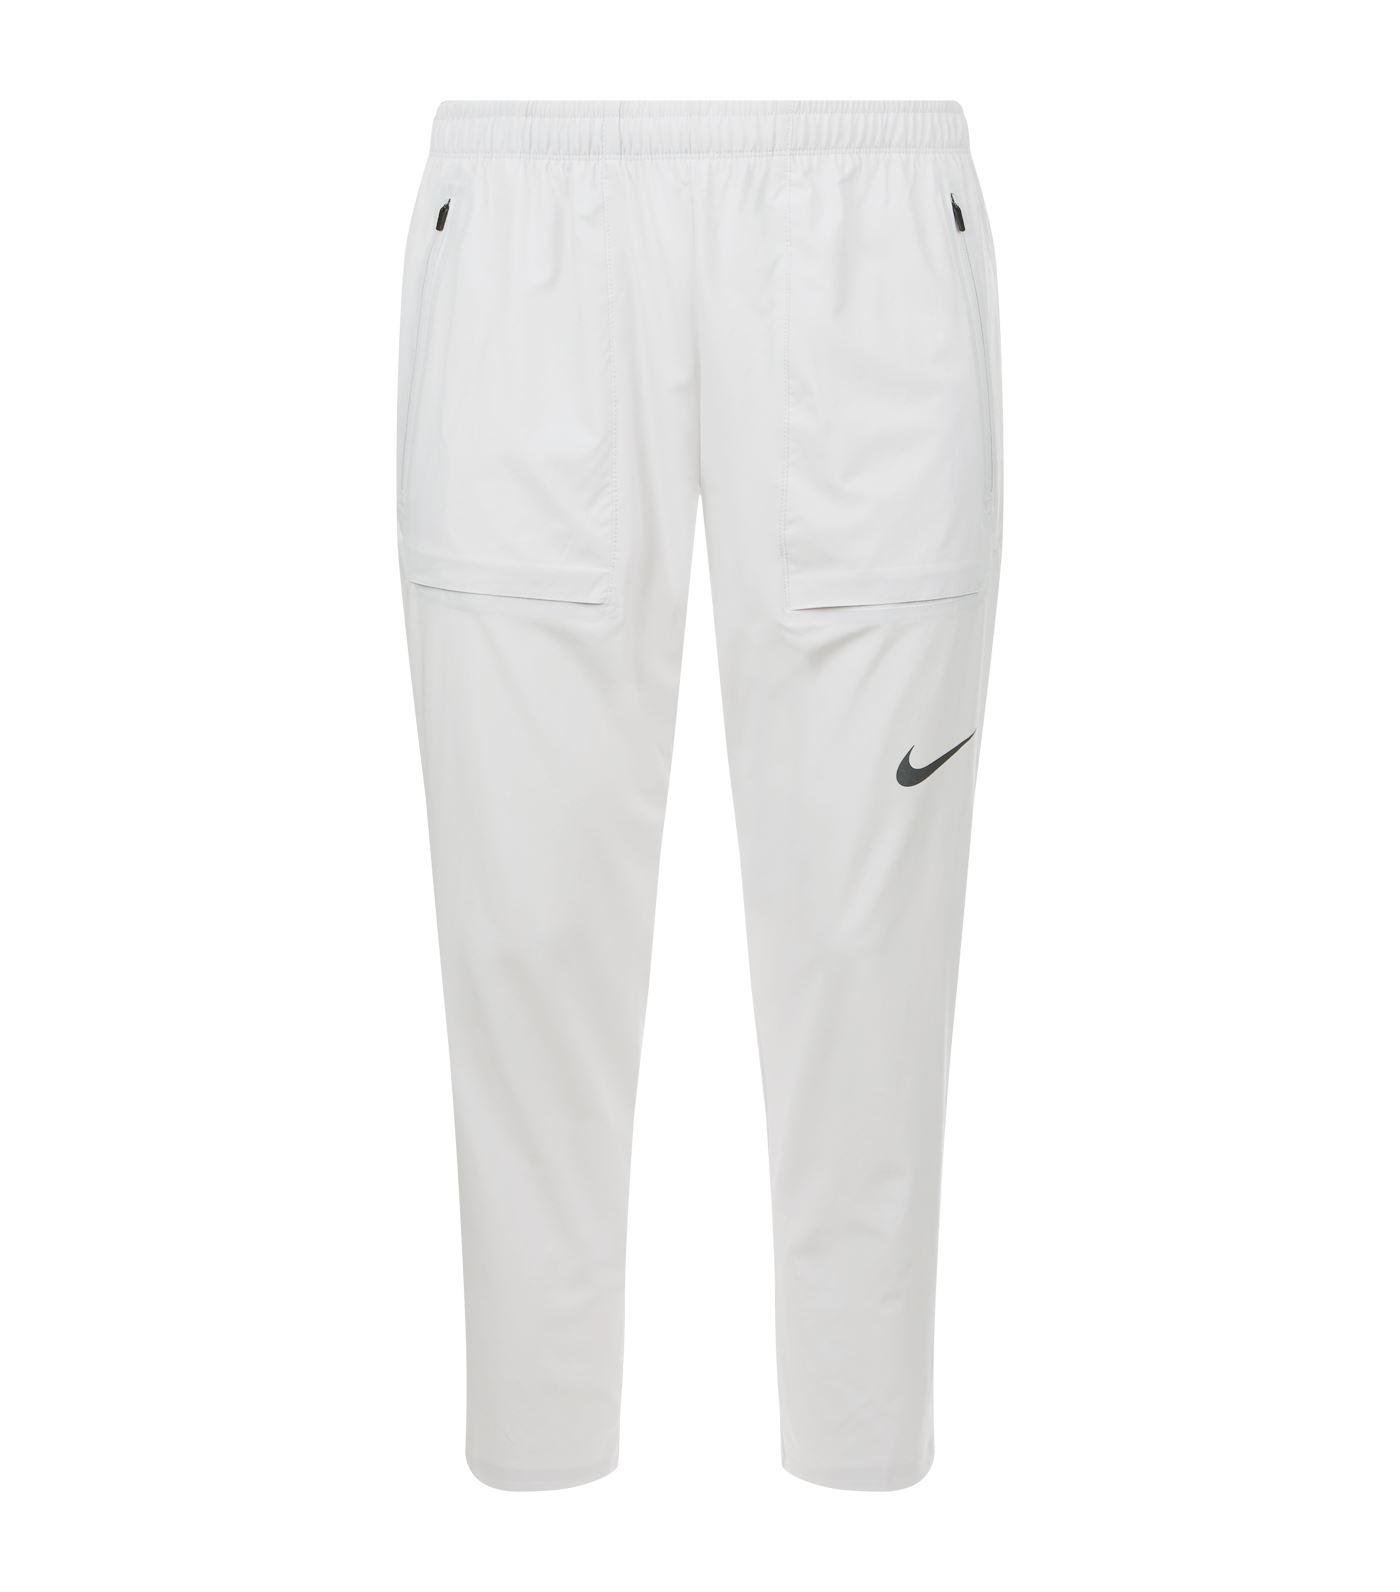 Nike Run Division Cropped Sweatpants in Grey (Gray) for Men - Lyst